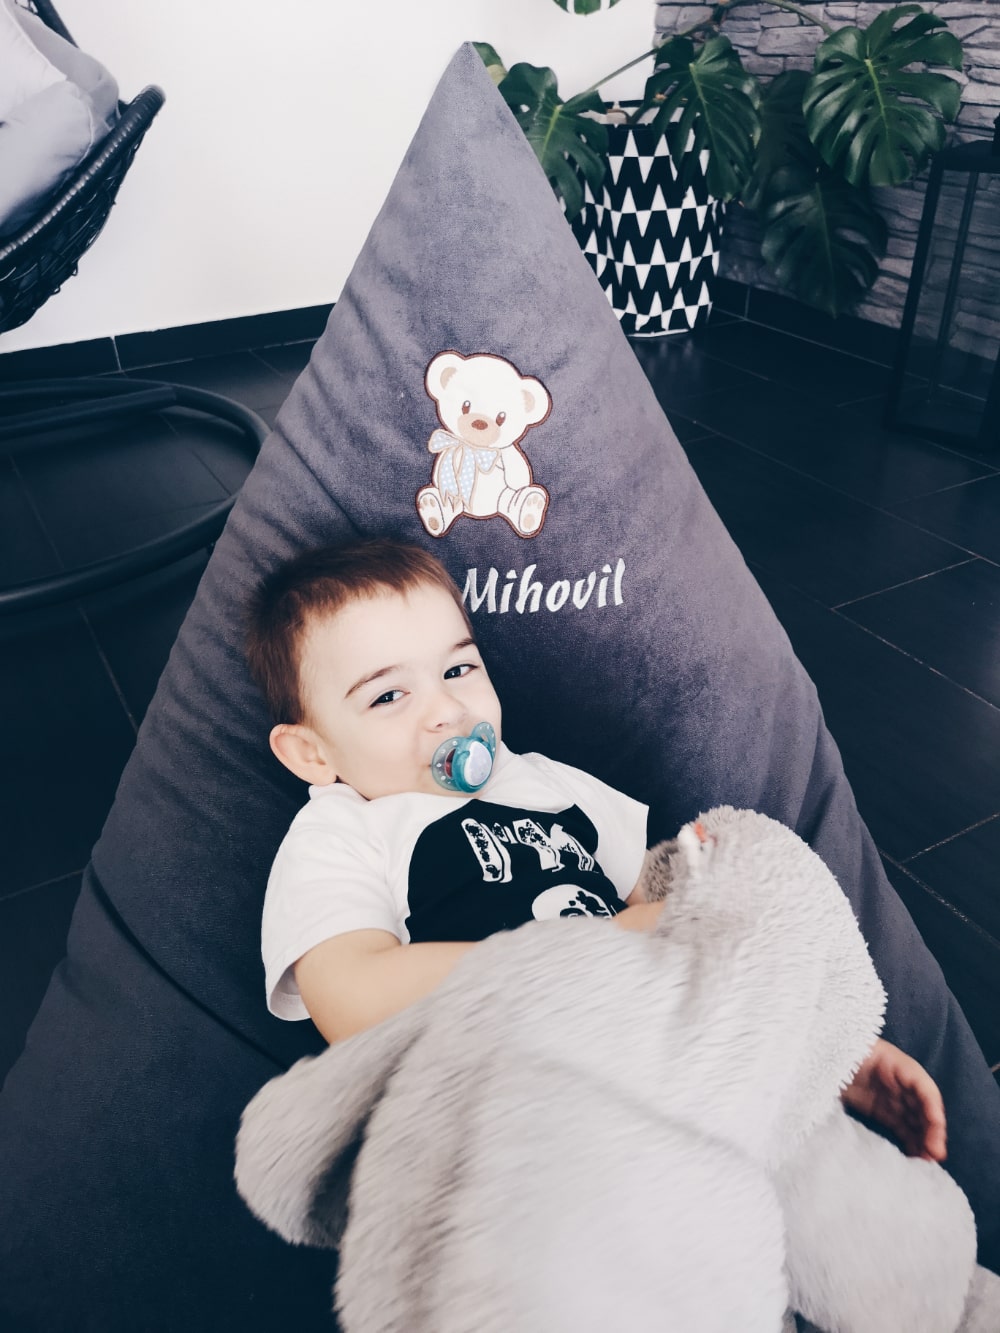 Little boy sitting in a personalized bean bag and enjoying it